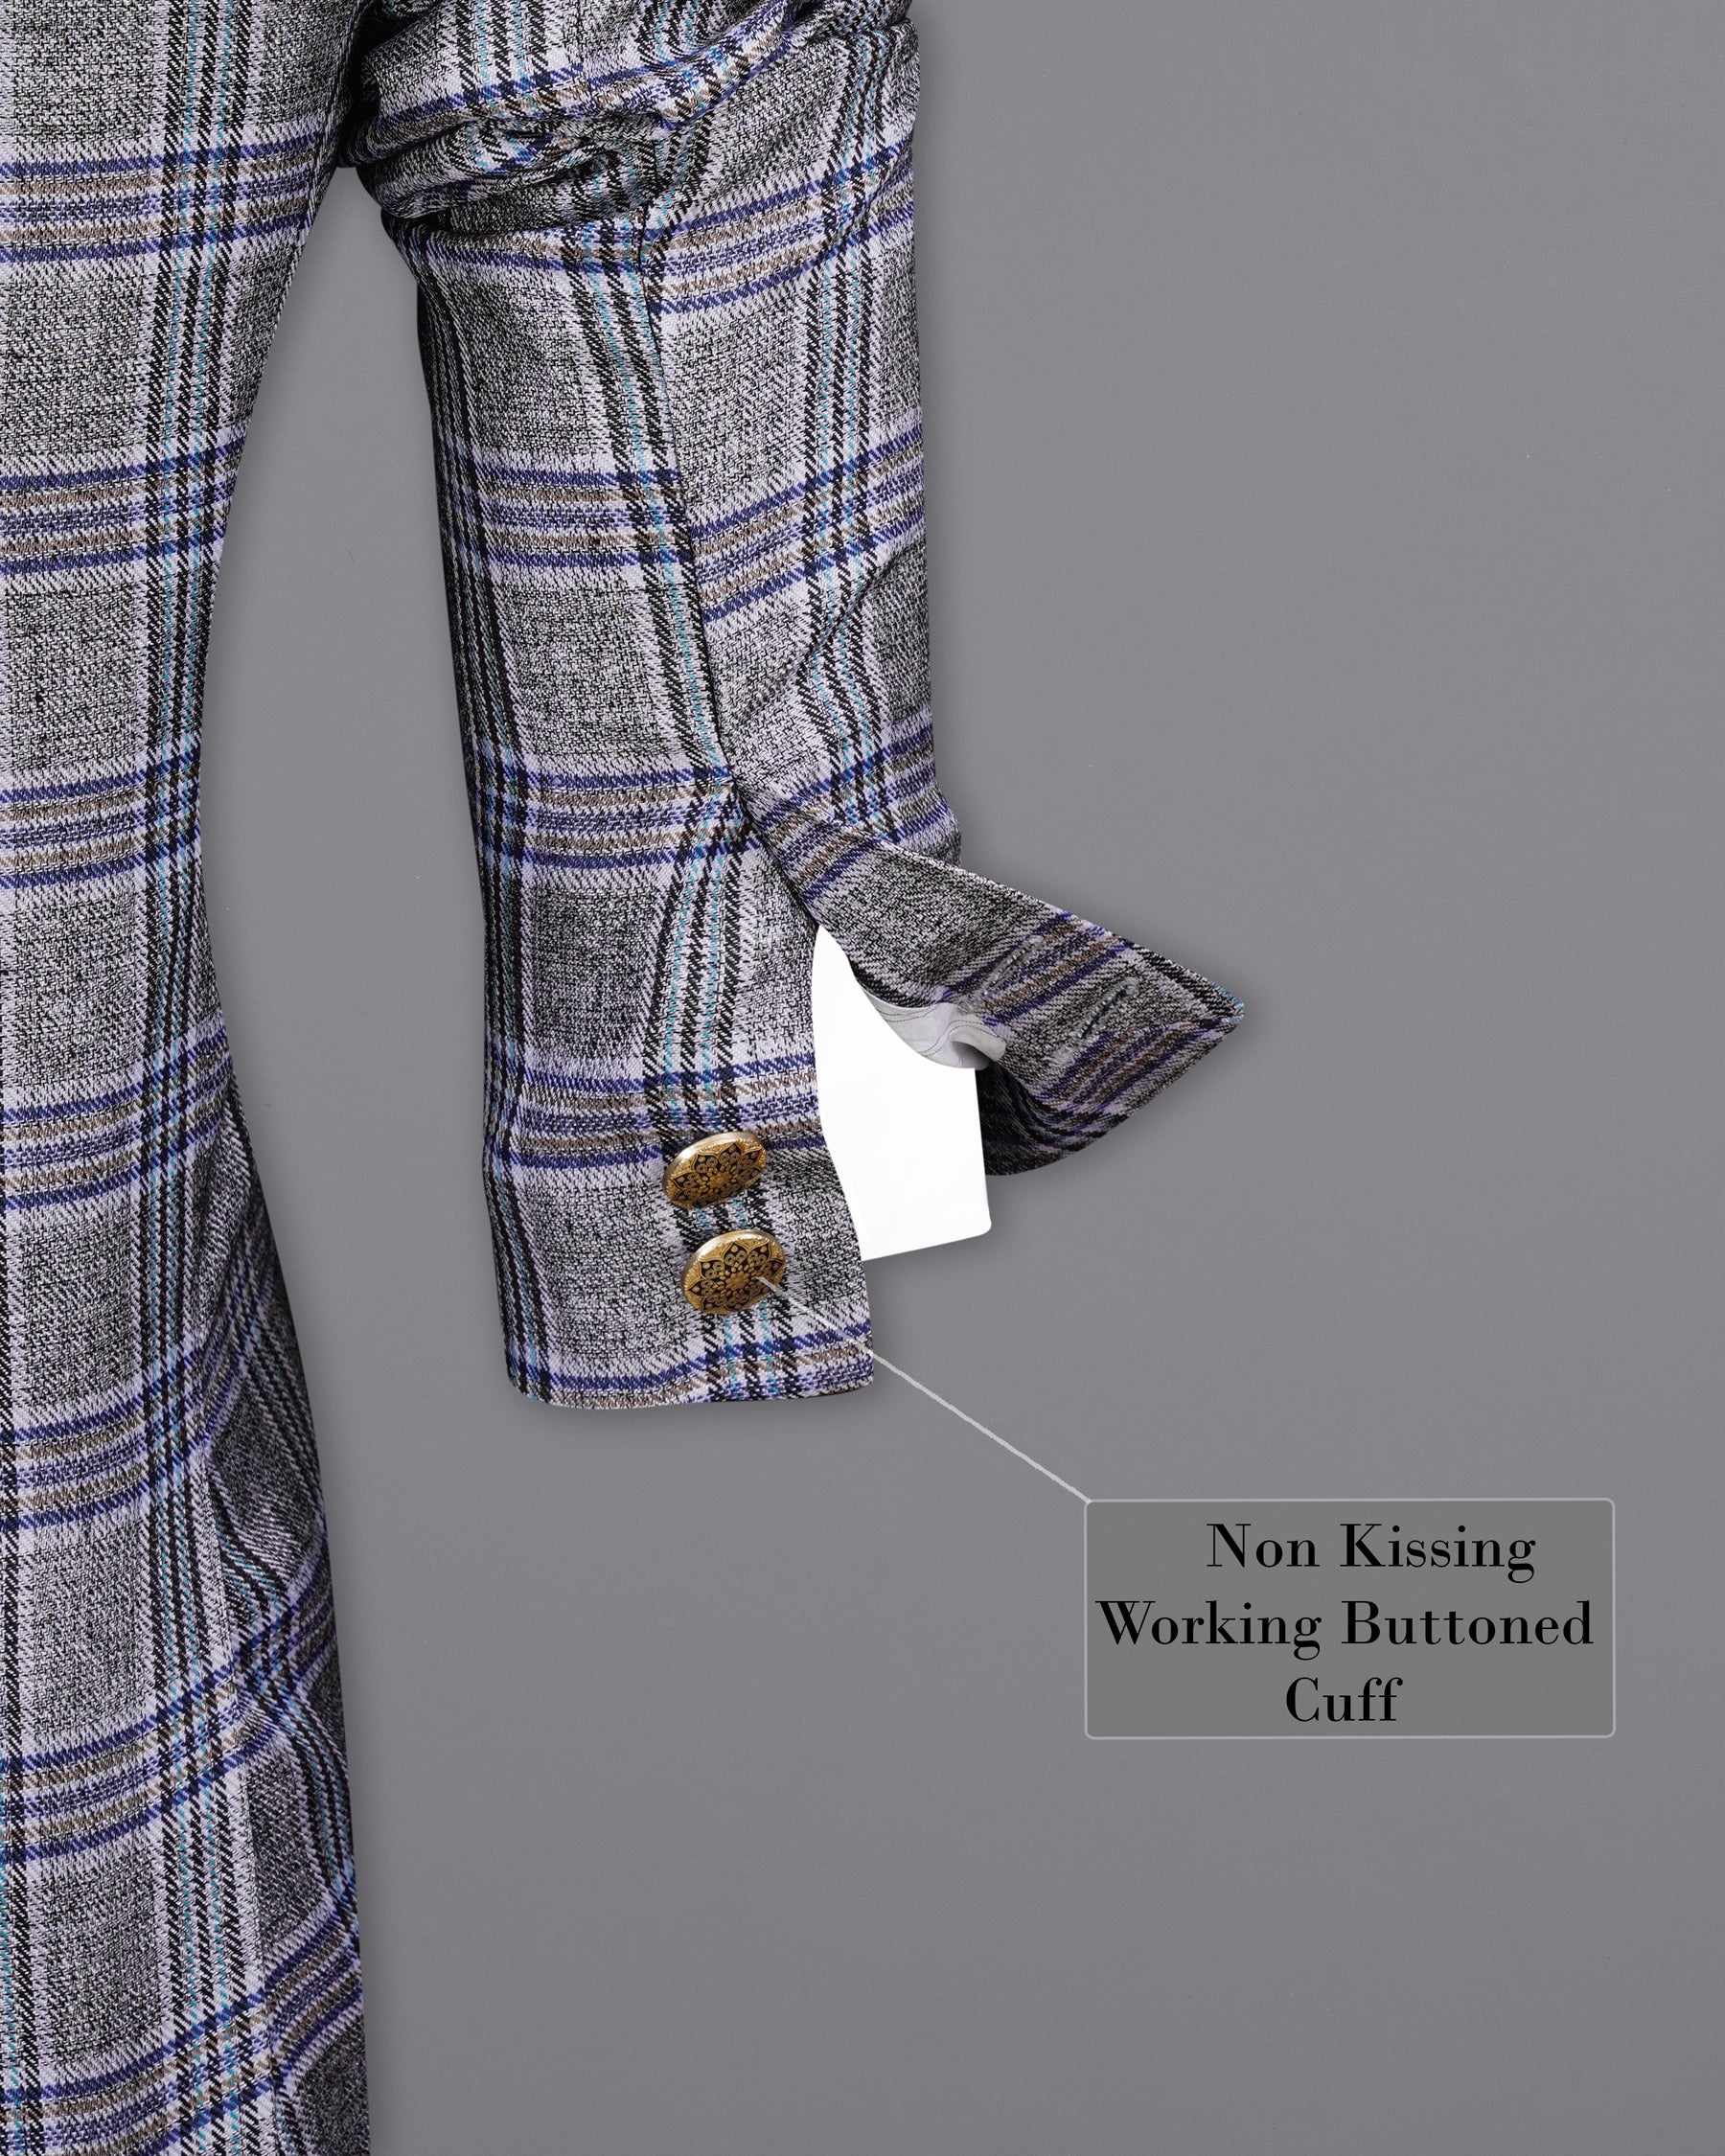 StarDust Gray with Martinique Blue Plaid Bandhgala Blazer BL2145-BG-36, BL2145-BG-38, BL2145-BG-40, BL2145-BG-42, BL2145-BG-44, BL2145-BG-46, BL2145-BG-48, BL2145-BG-50, BL2145-BG-52, BL2145-BG-54, BL2145-BG-56, BL2145-BG-58, BL2145-BG-60